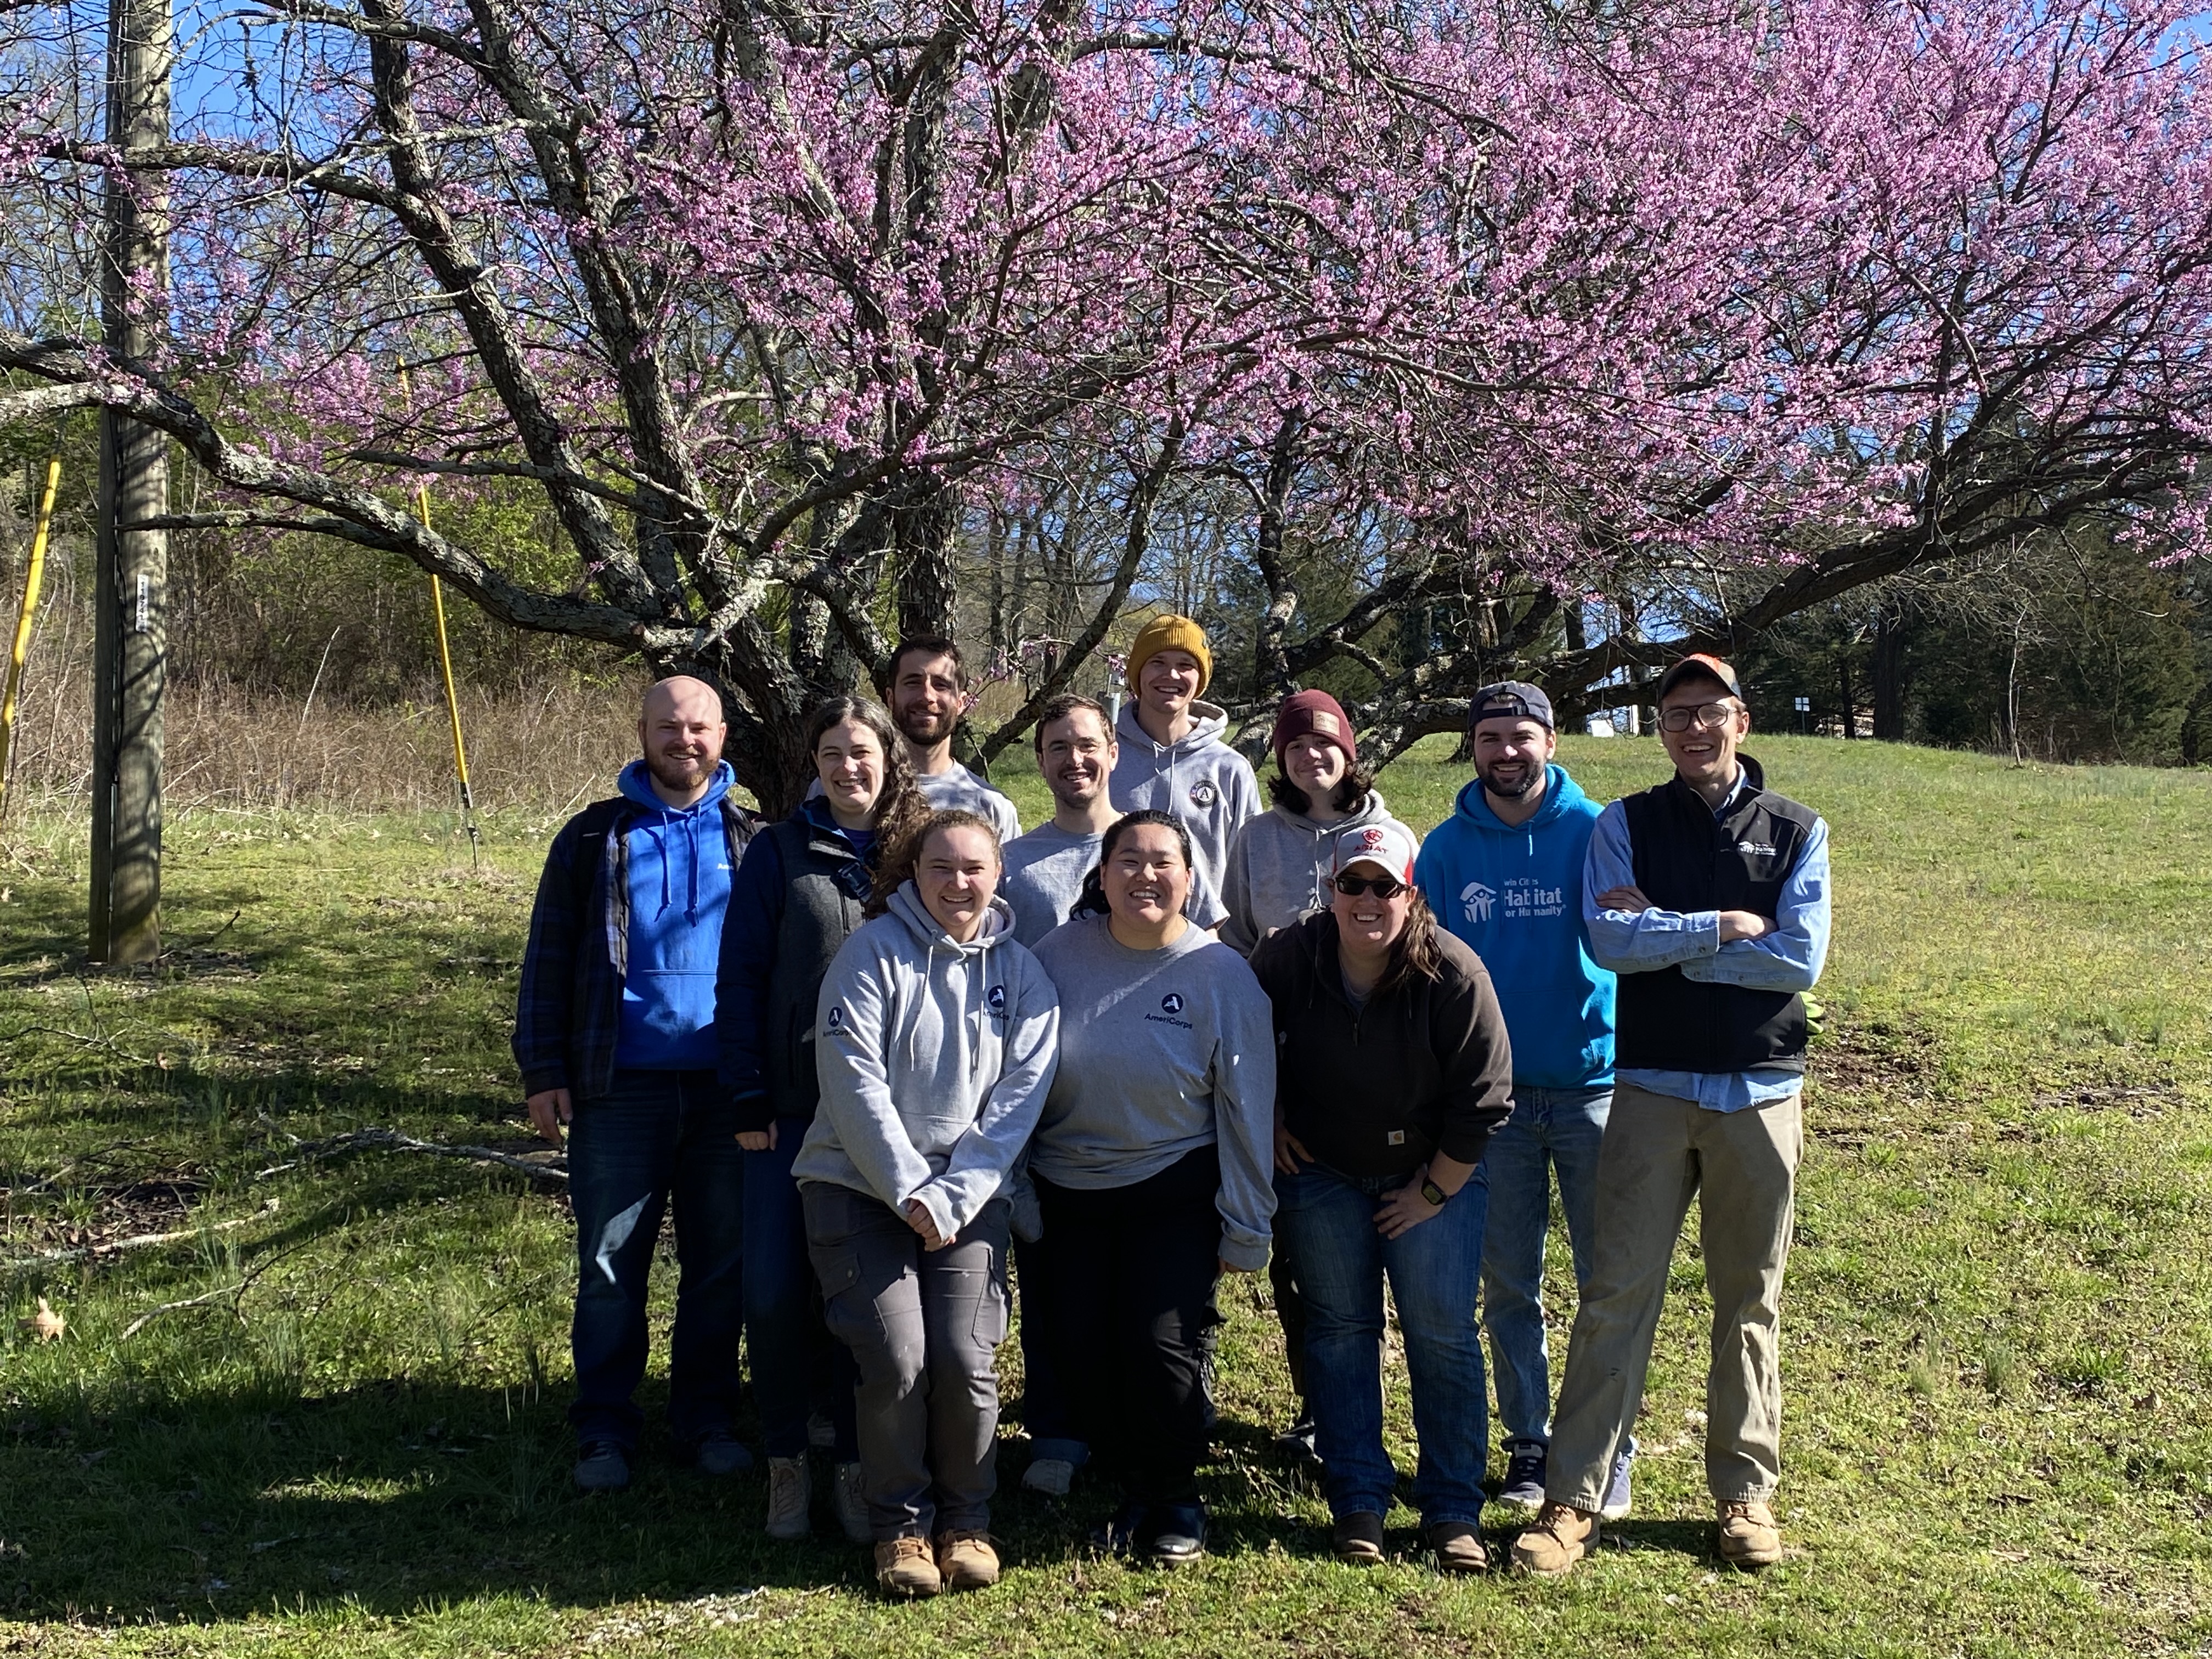 AmeriCorps Members pose in front of a flowering tree at the Owl's Hill Nature Sanctuary